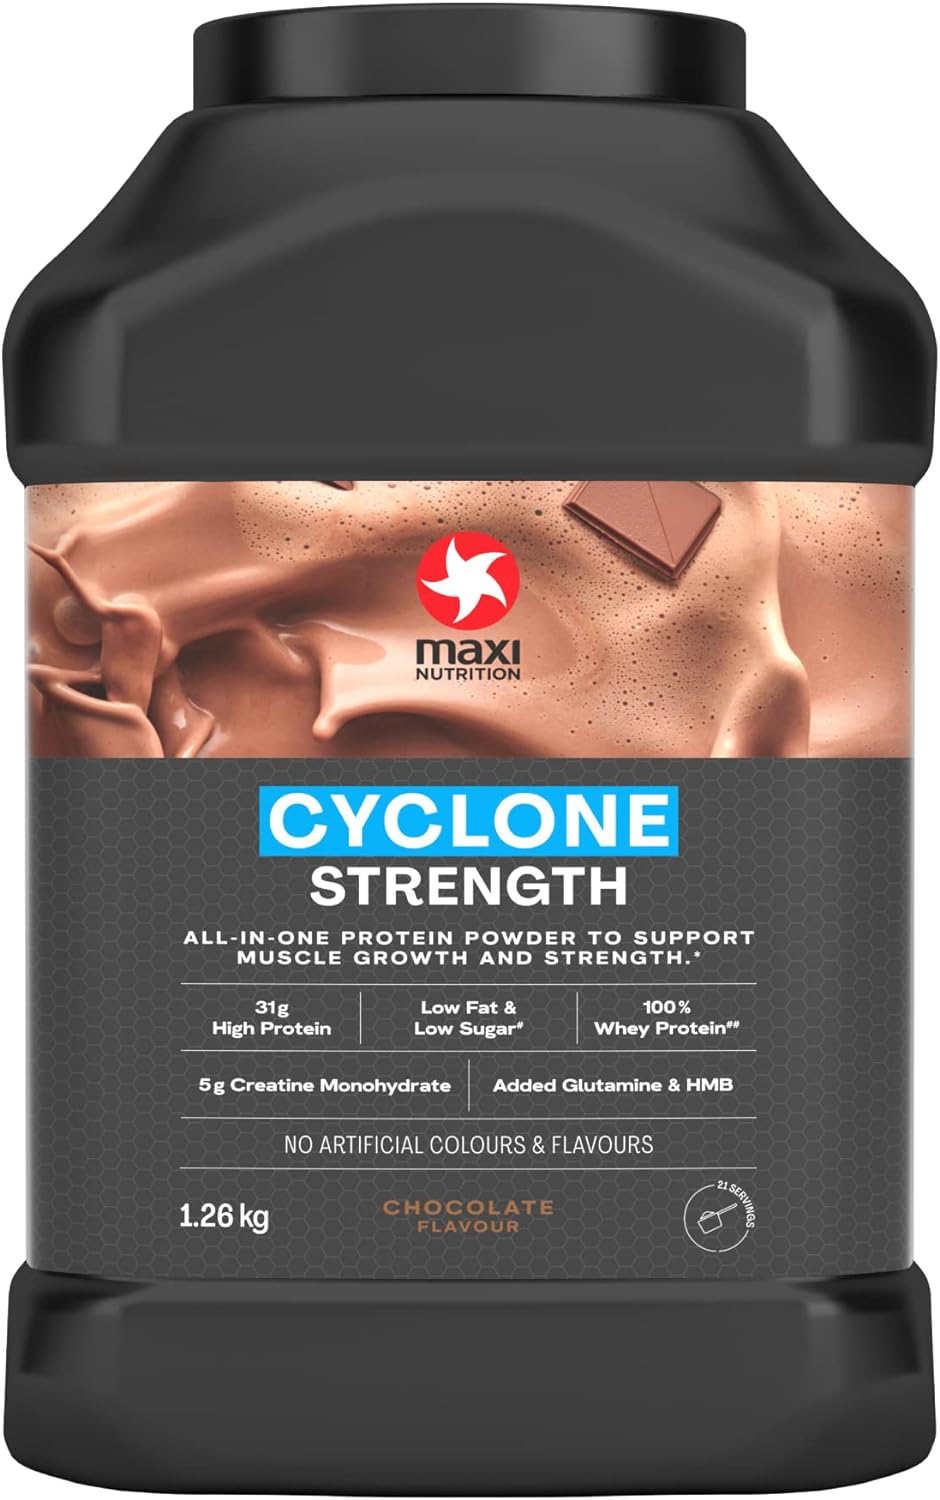 MaxiNutrition - Cyclone, Chocolate - Premium Whey Protein Powder with Added Creatine ? Low in Sugar and Fat, Vegetarian-Friendly - 31g Protein, 204 kcal per Serving, 1.26kg